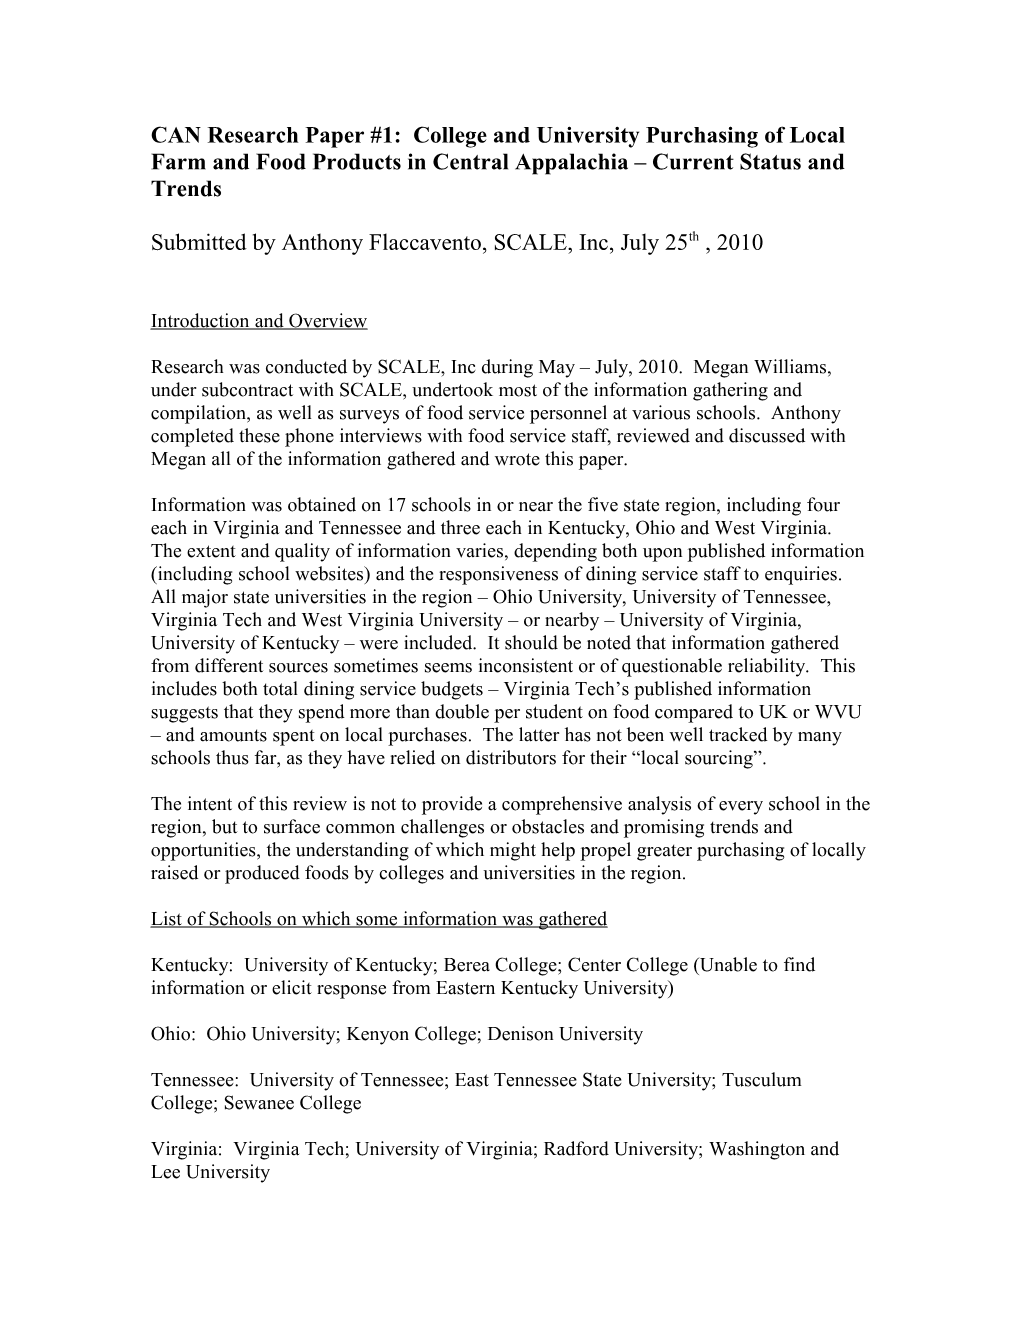 CAN Research Paper #1: College and University Purchasing of Local Farm and Food Products